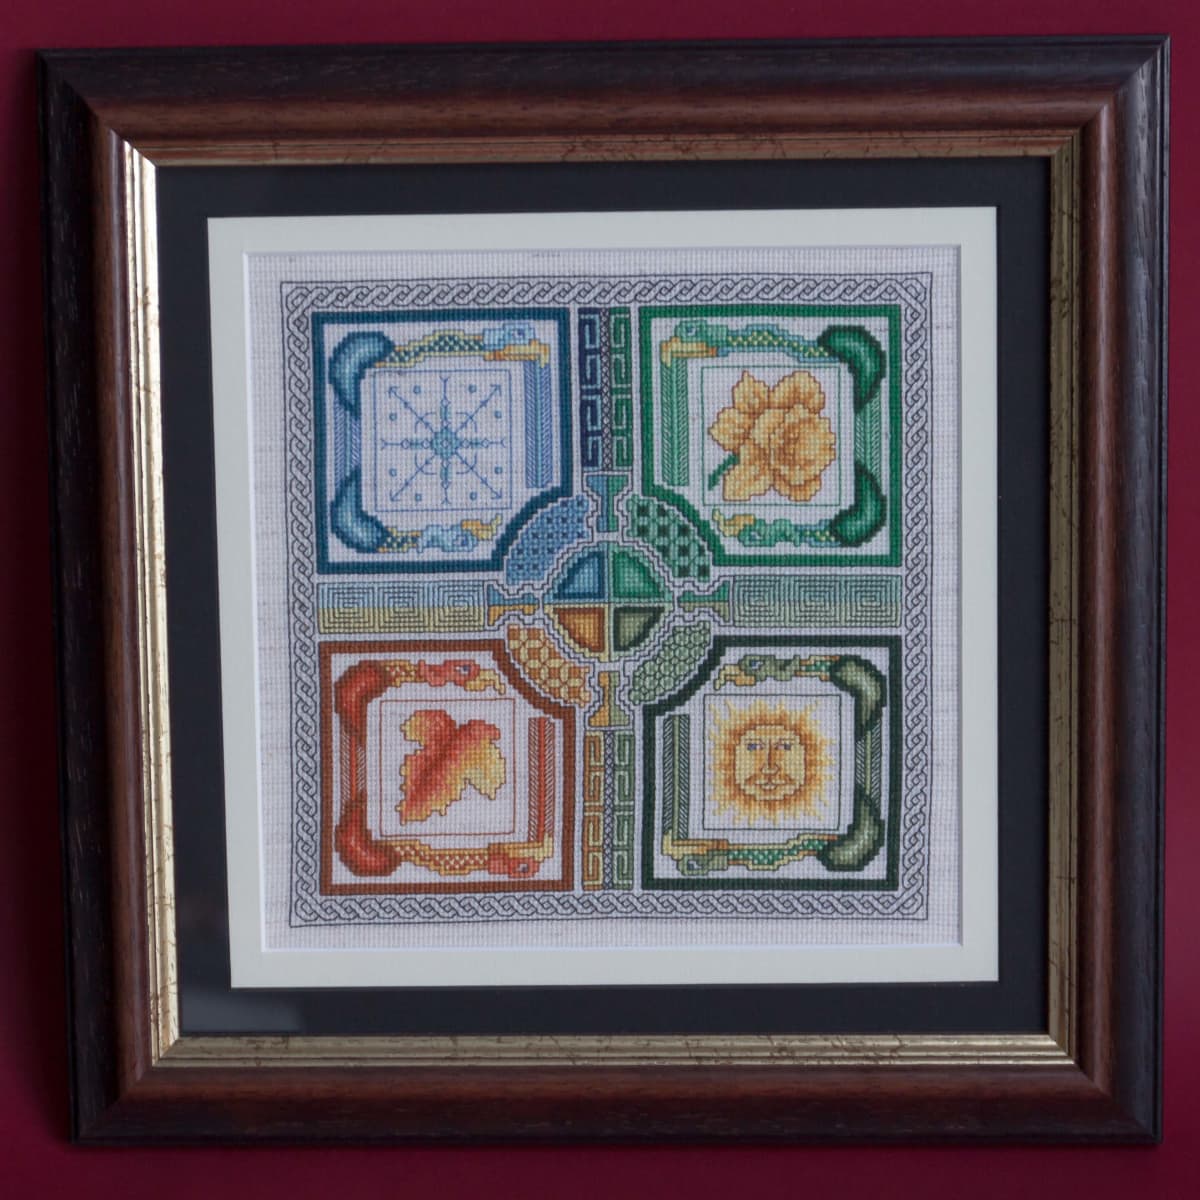 How to Finish and Frame a Cross Stitch Project